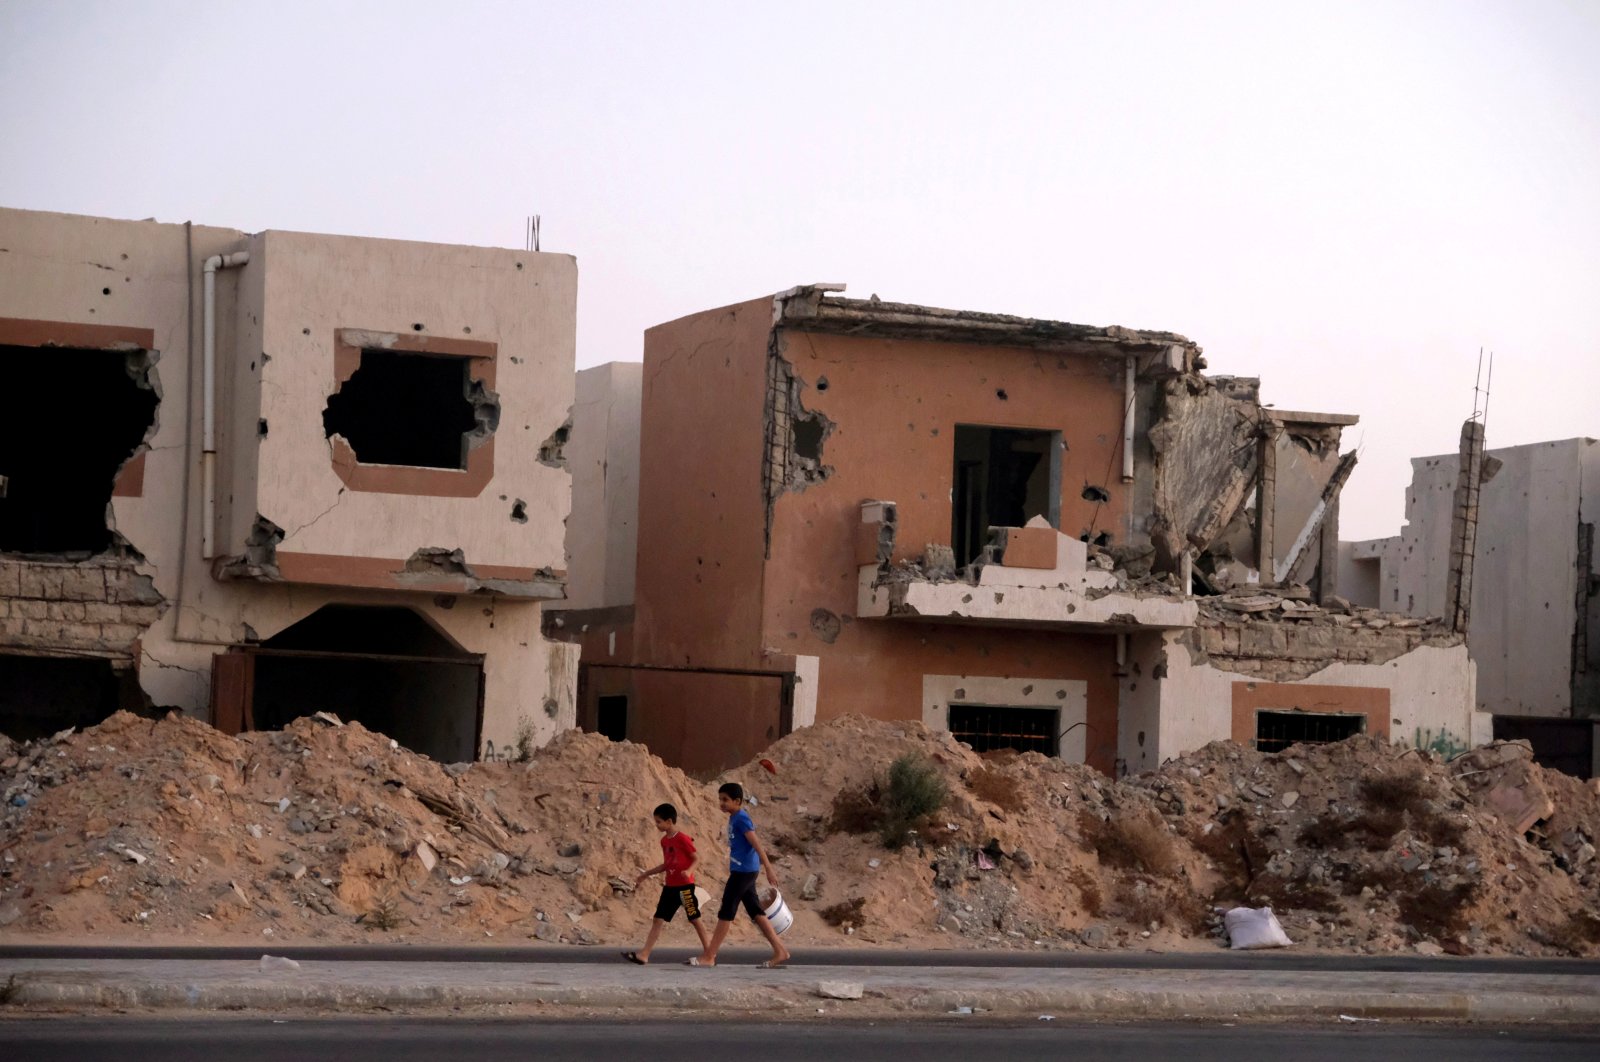 Boys walk past houses that were destroyed in past fighting with Daesh militants in Sirte, Libya, Aug. 17, 2020. (REUTERS Photo)